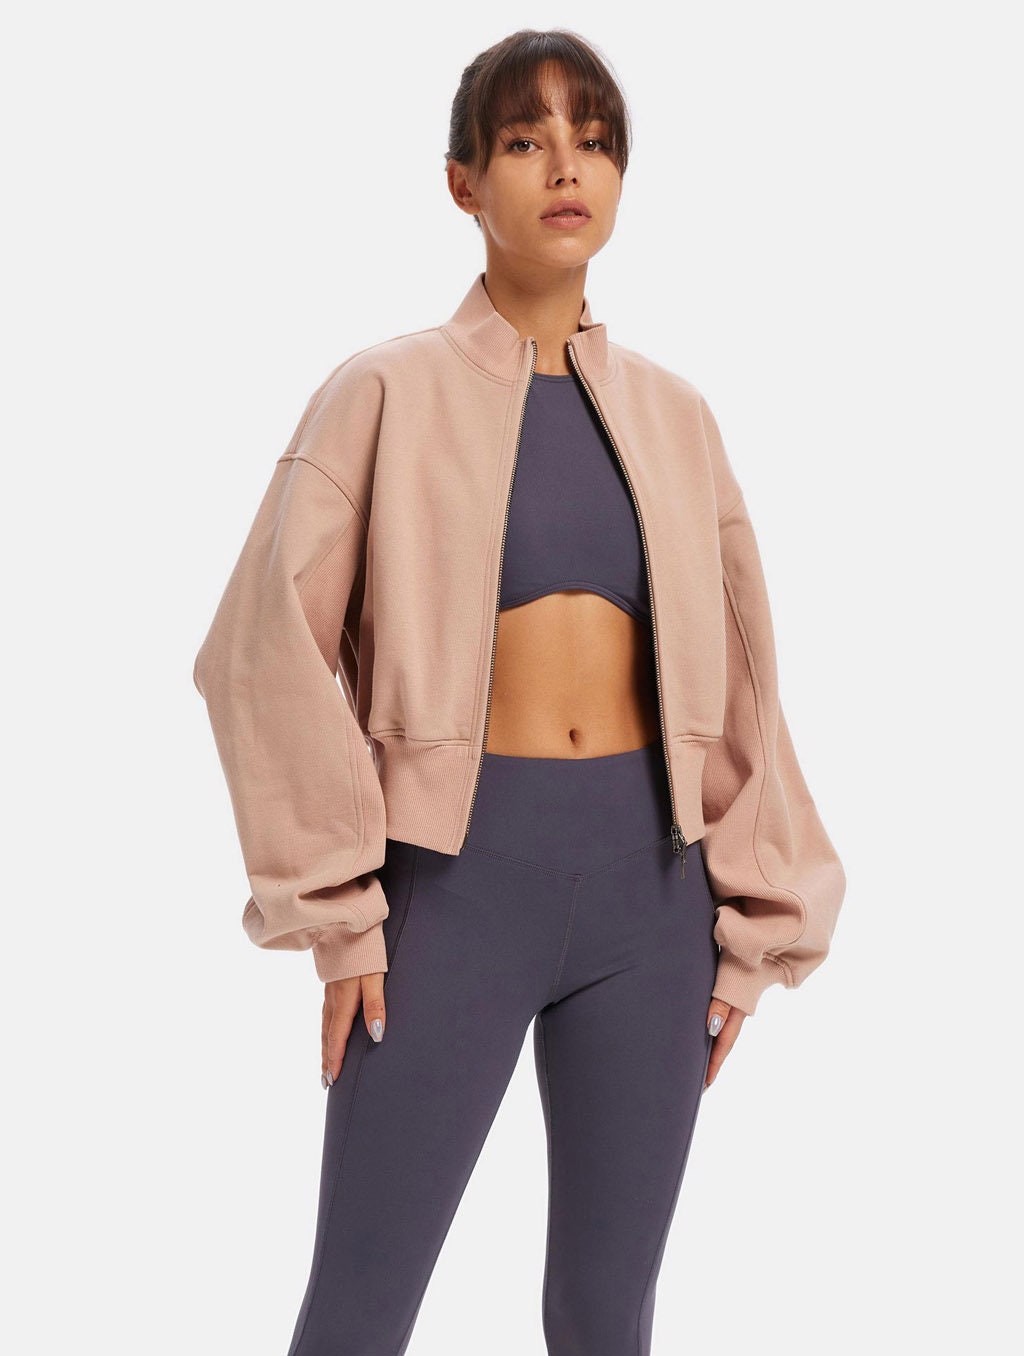 Covalent Activewear Womens Bomber Jacket